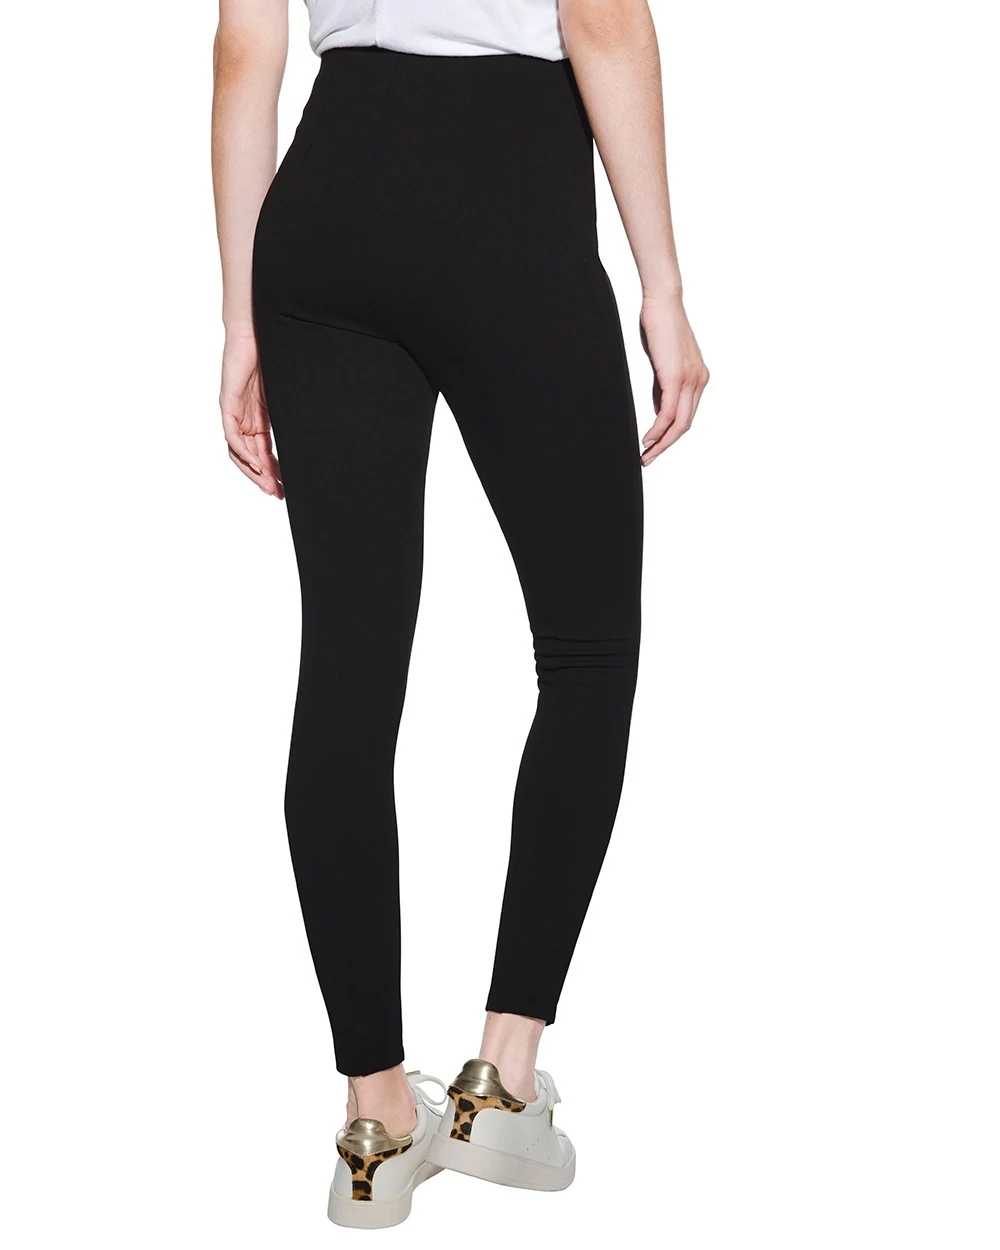 Outlet WHBM High-Rise Ponte Leggings click to view larger image.